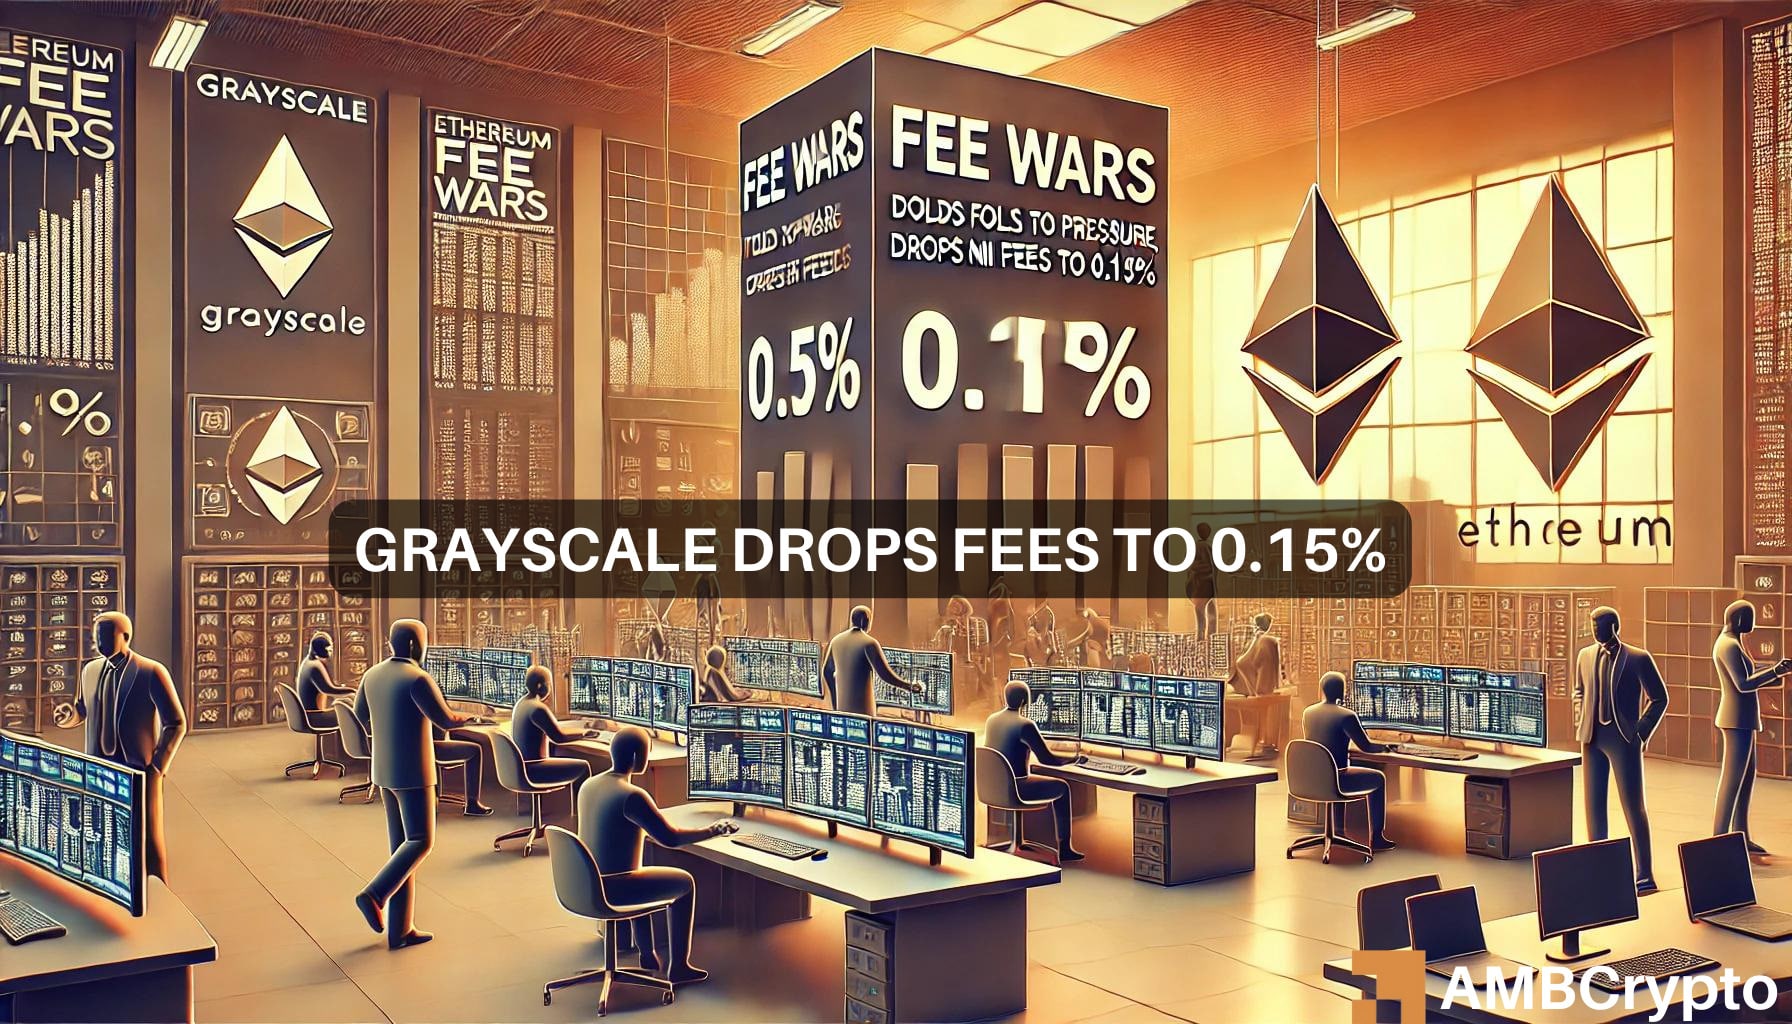 Ethereum ETF fee wars: Grayscale goes ‘for the jugular,’ drops Mini fees to 0.15%